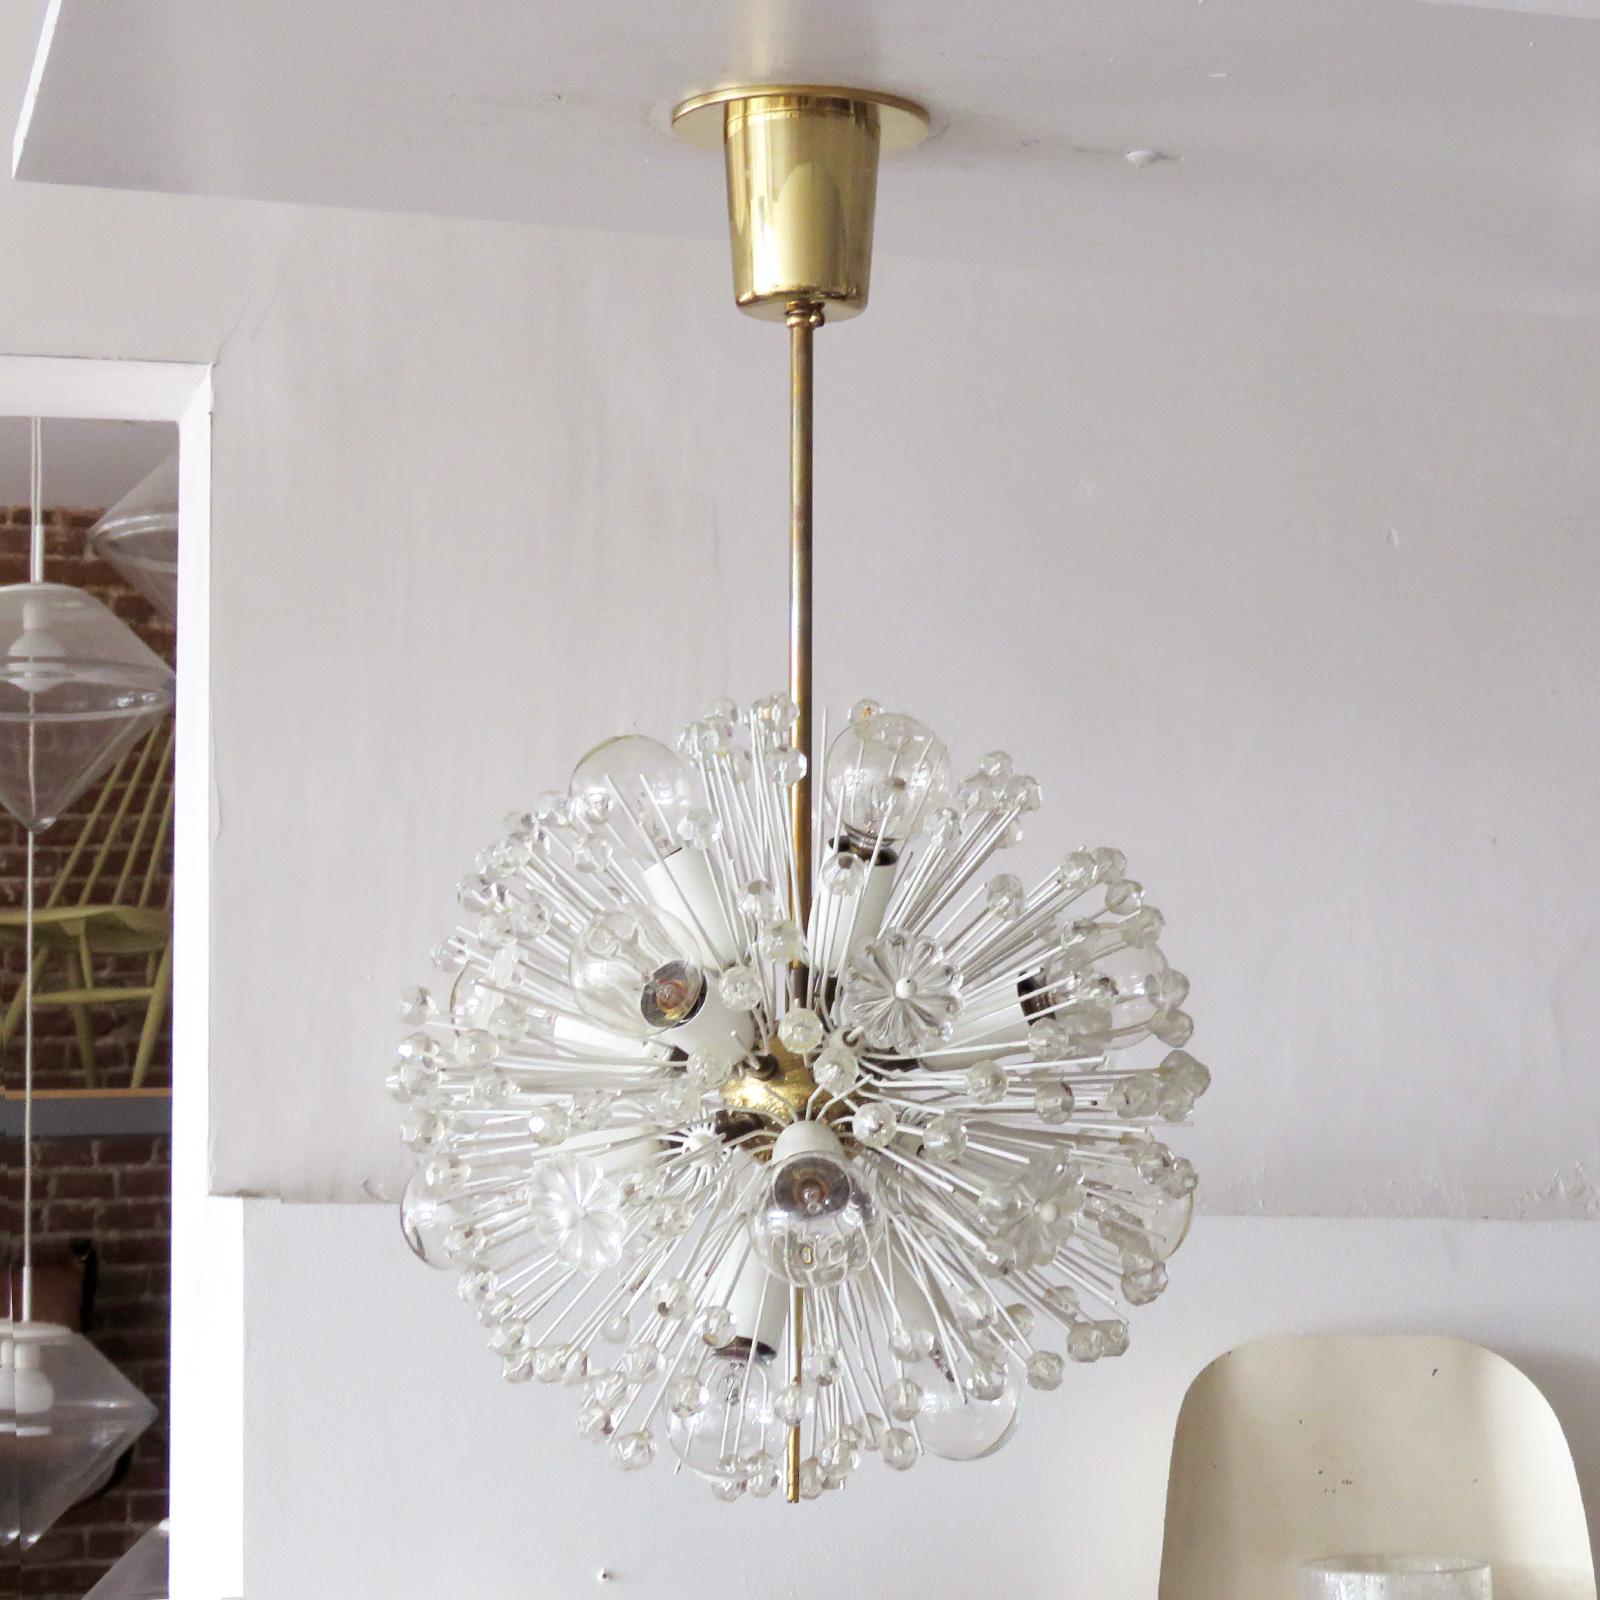 Beautiful and delicate fourteen-light brass fixture by Emil Stejnar for Nikoll with copious amounts of Austrian crystals, overall height can be adjusted, wired for US standards, fourteen E12 sockets, max. wattage 25w per socket, bulbs provided as a